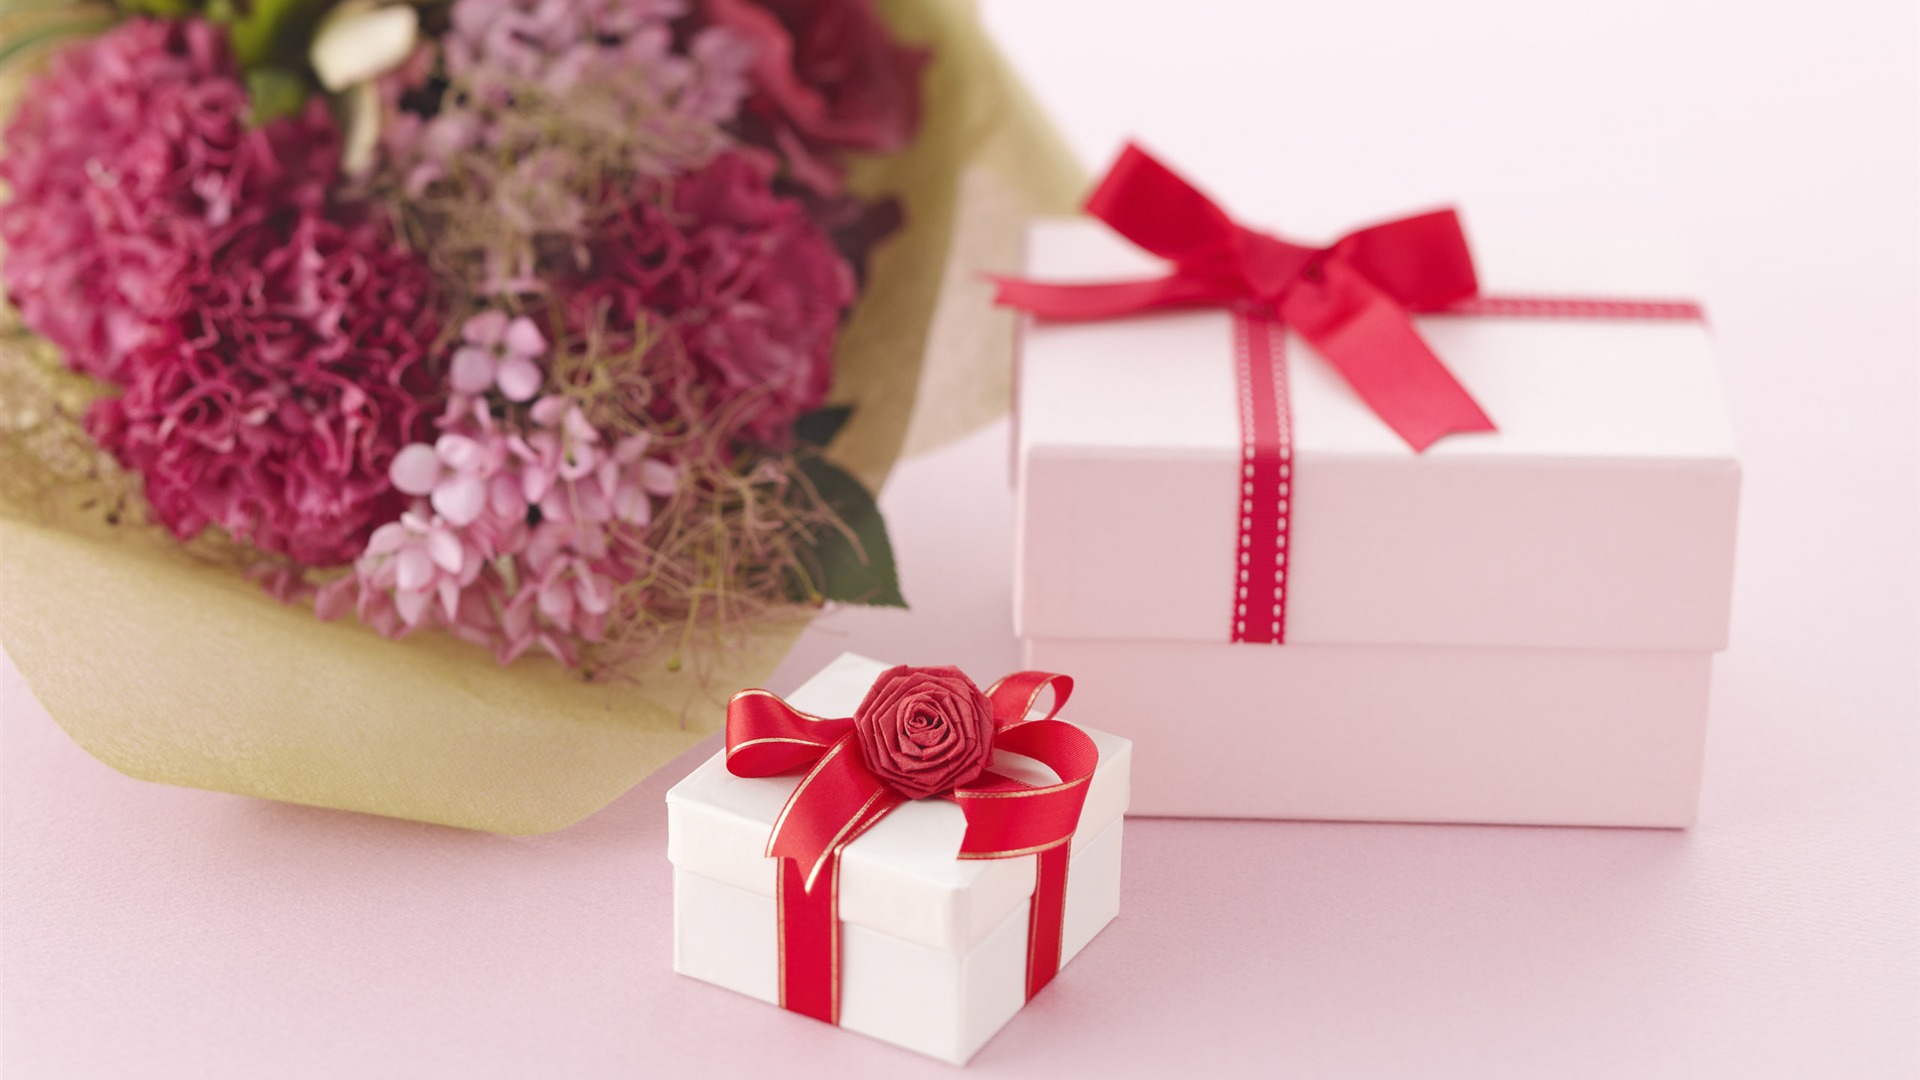 Flowers Gifts HD Wallpapers (1) #19 - 1920x1080